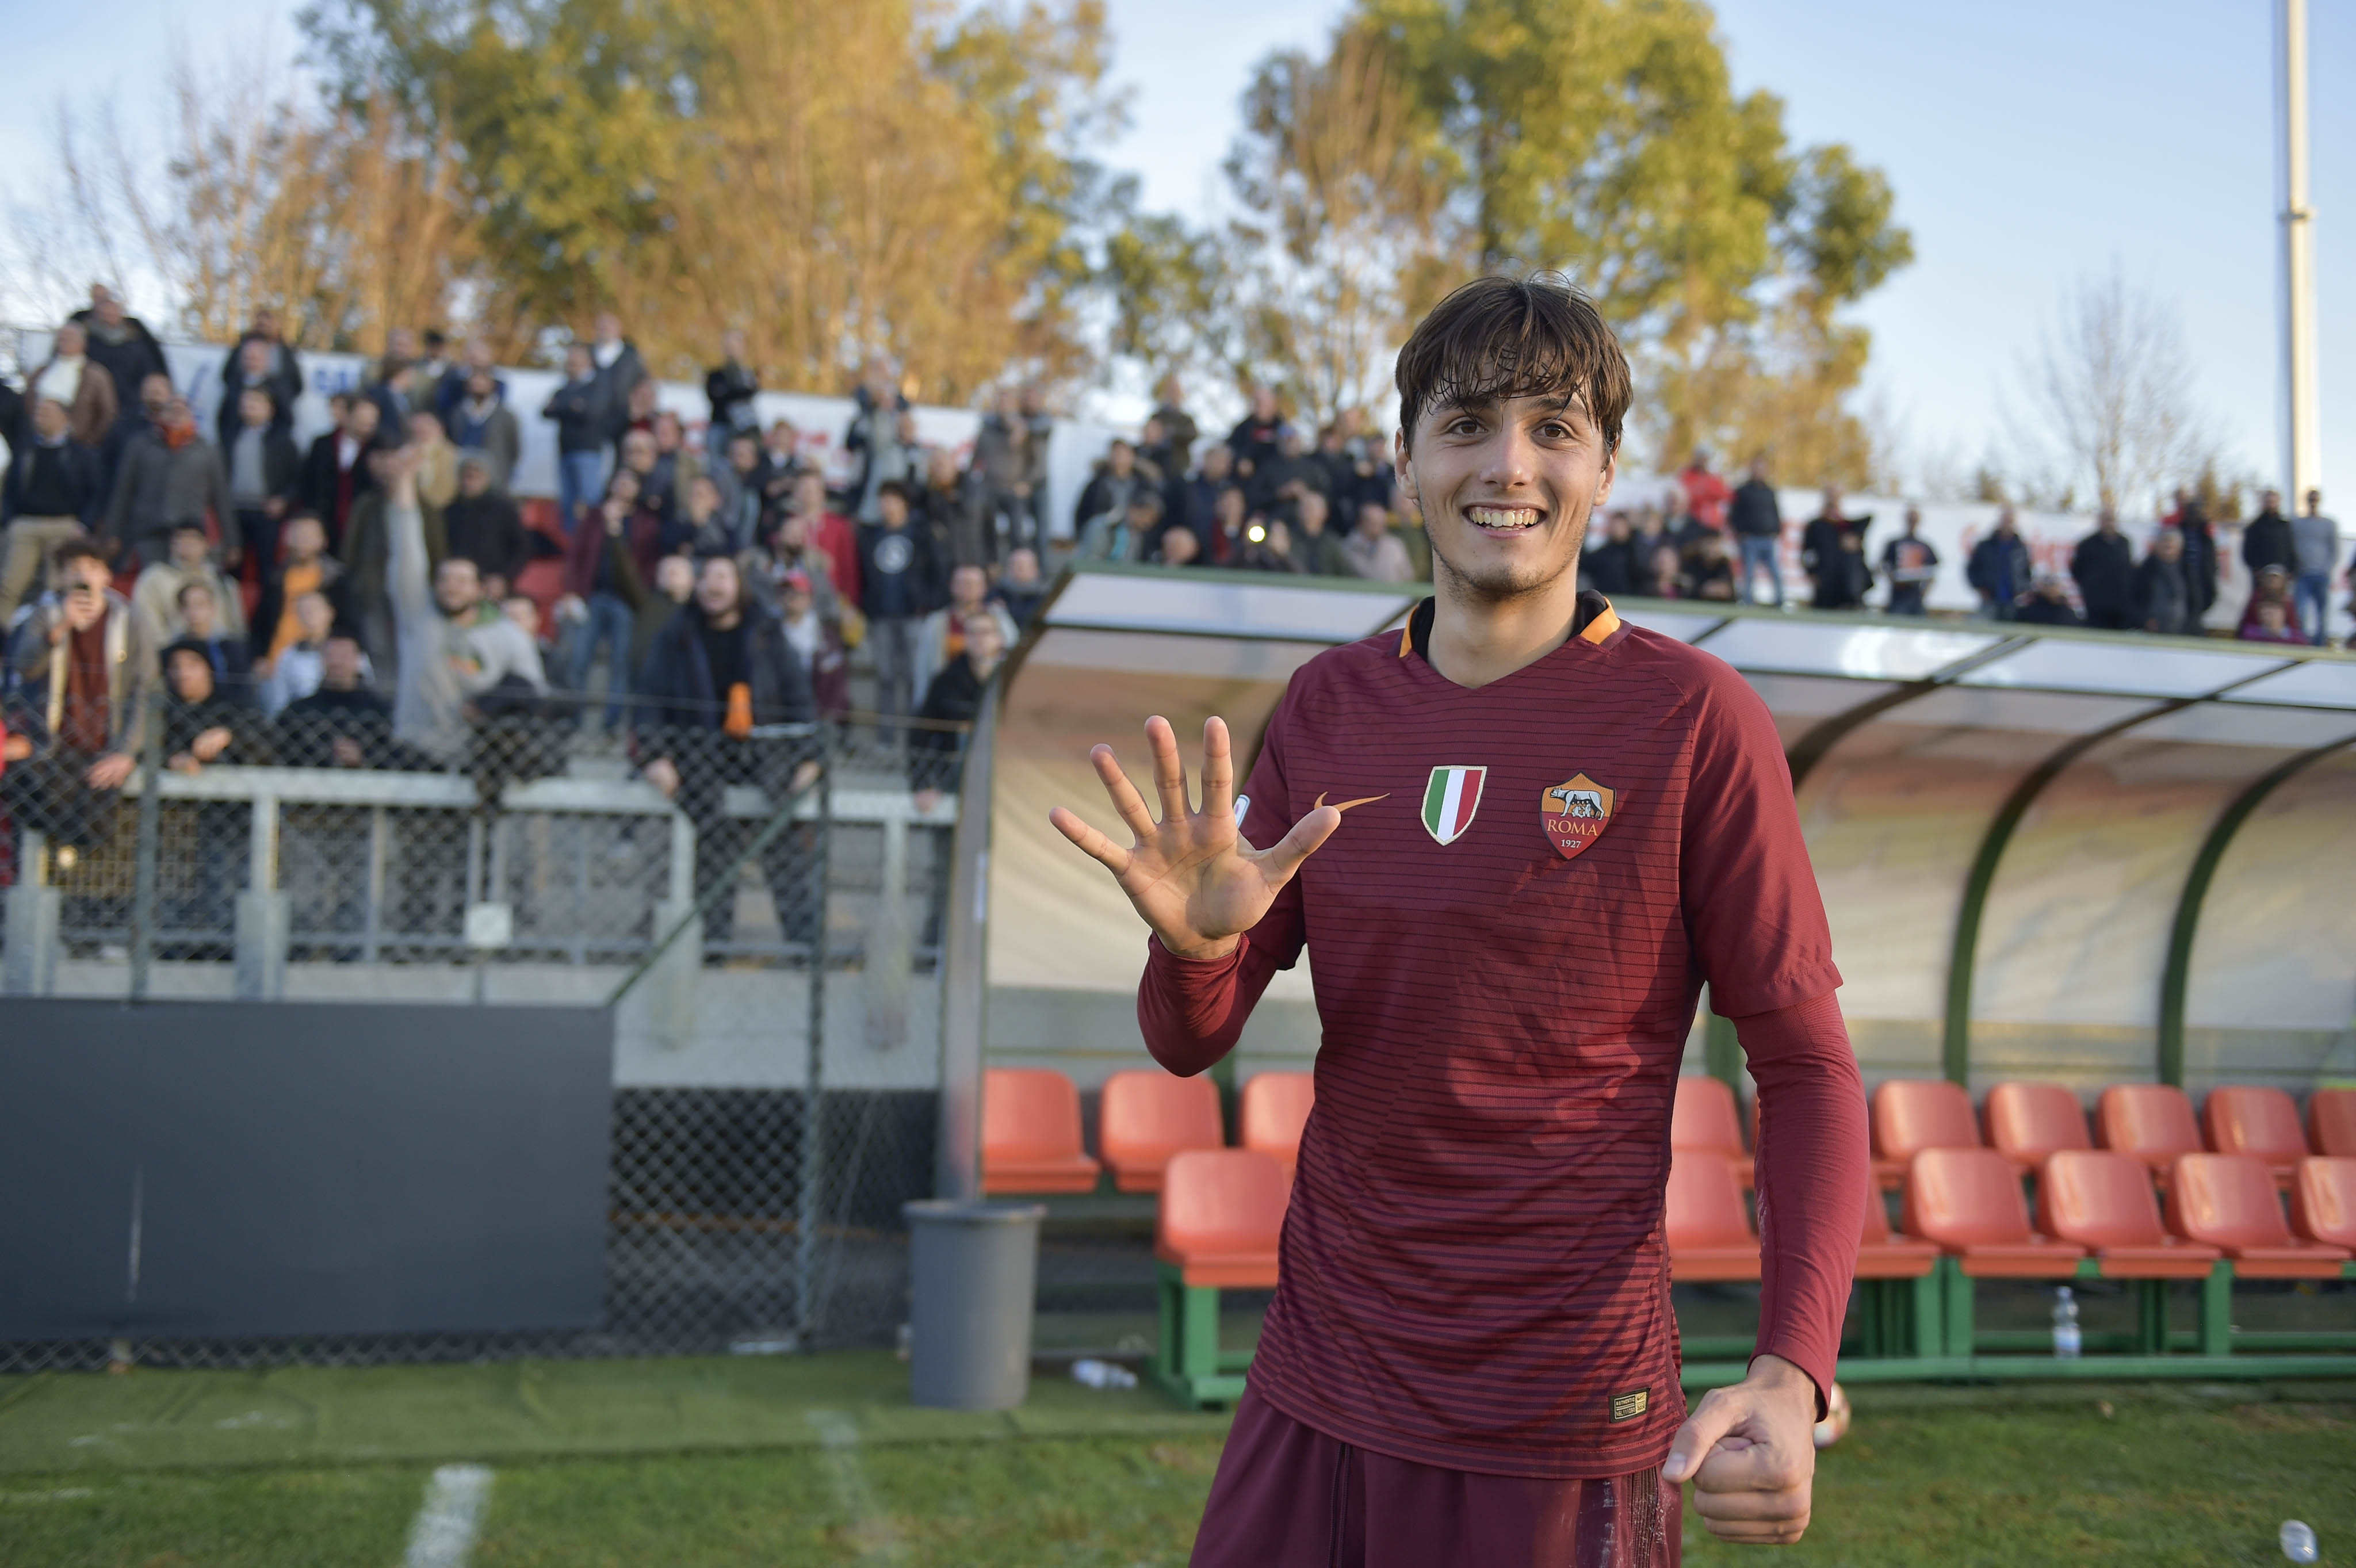 ROME, ITALY - DECEMBER 21: Edoardo Soleri celebrates the victory after the Primavera Tim Cup juvenile match between AS Roma and SS Lazio at Stadio Tre Fontane on December 21, 2016 in Rome, Italy. (Photo by Luciano Rossi/AS Roma via Getty Images)